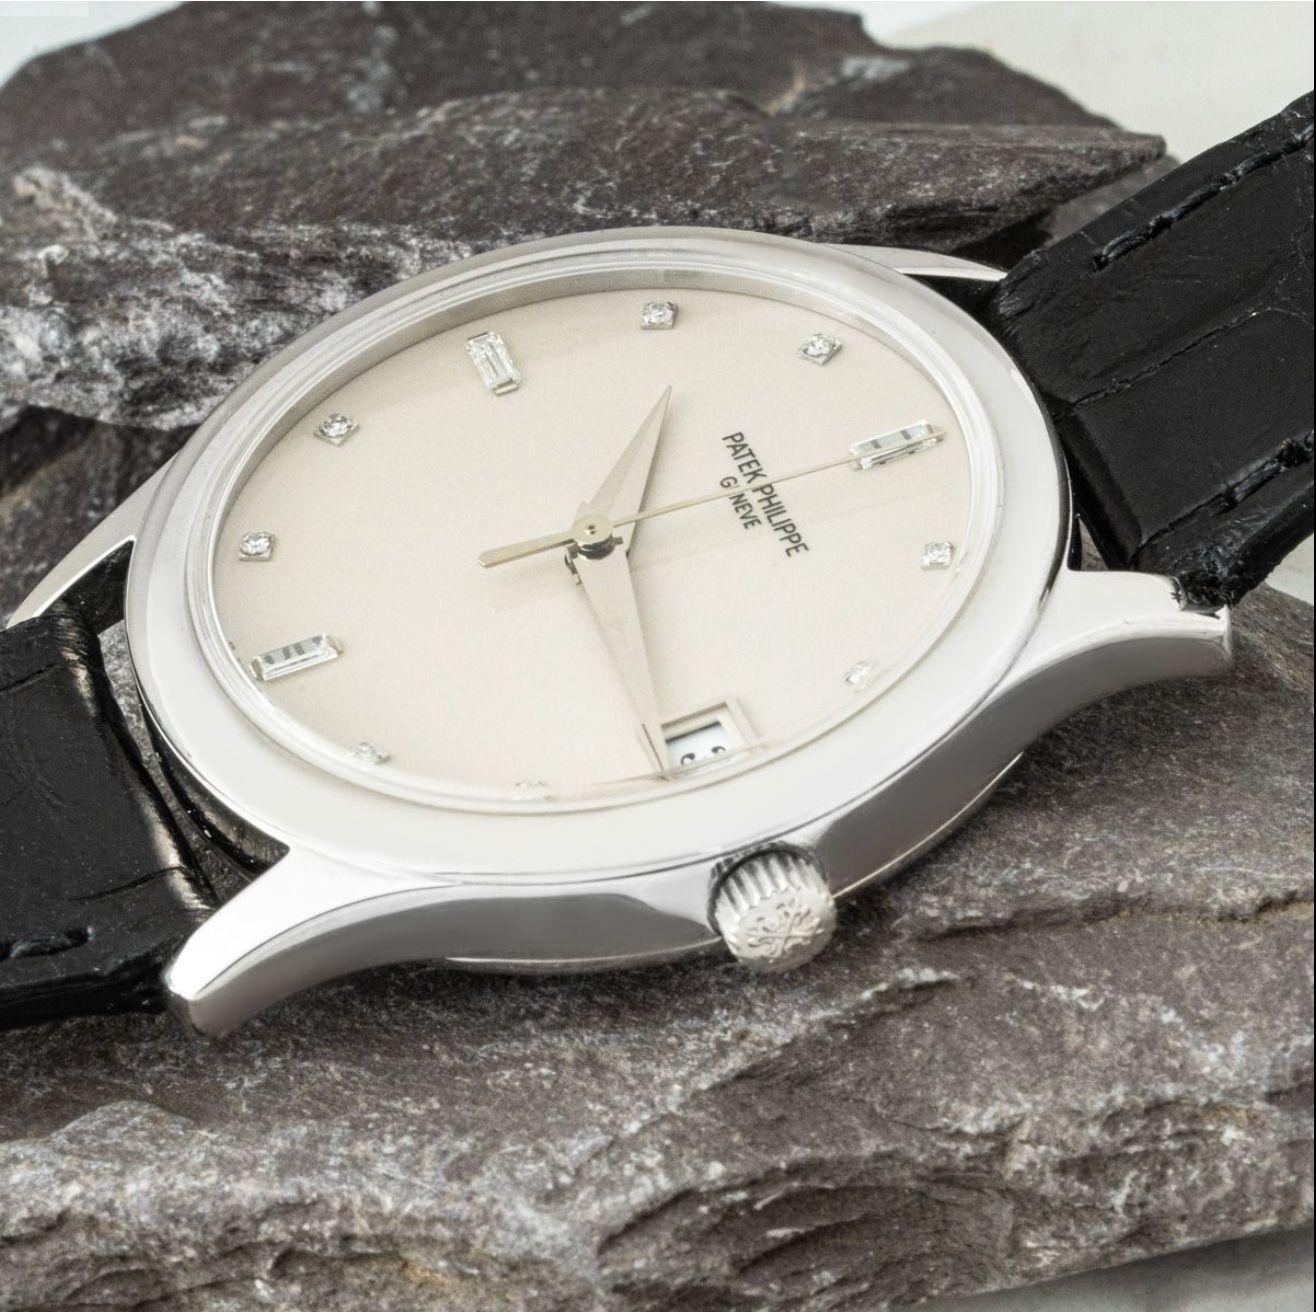 A rare platinum Calatrava wristwatch. Features a silver dial with a date aperture, 8 single cut diamonds and 3 baguette cut diamond hour markers as well as a platinum bezel. Fitted with a sapphire glass, a self-winding automatic movement and a Patek